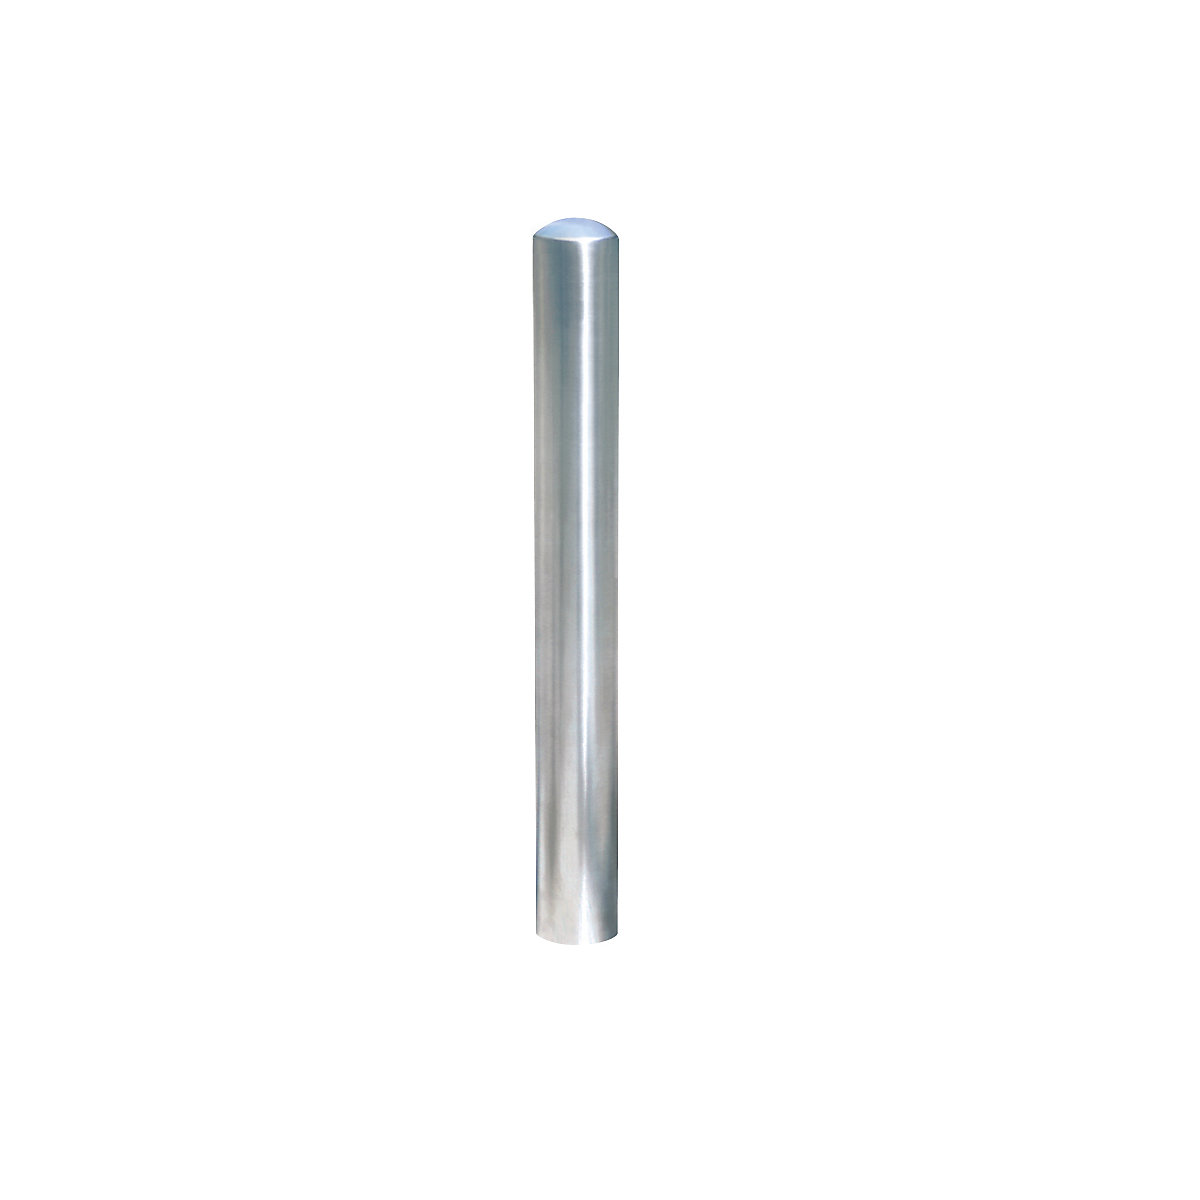 Stainless steel bollard, ground sleeve for removal, with triangle lock, Ø 76 mm-3